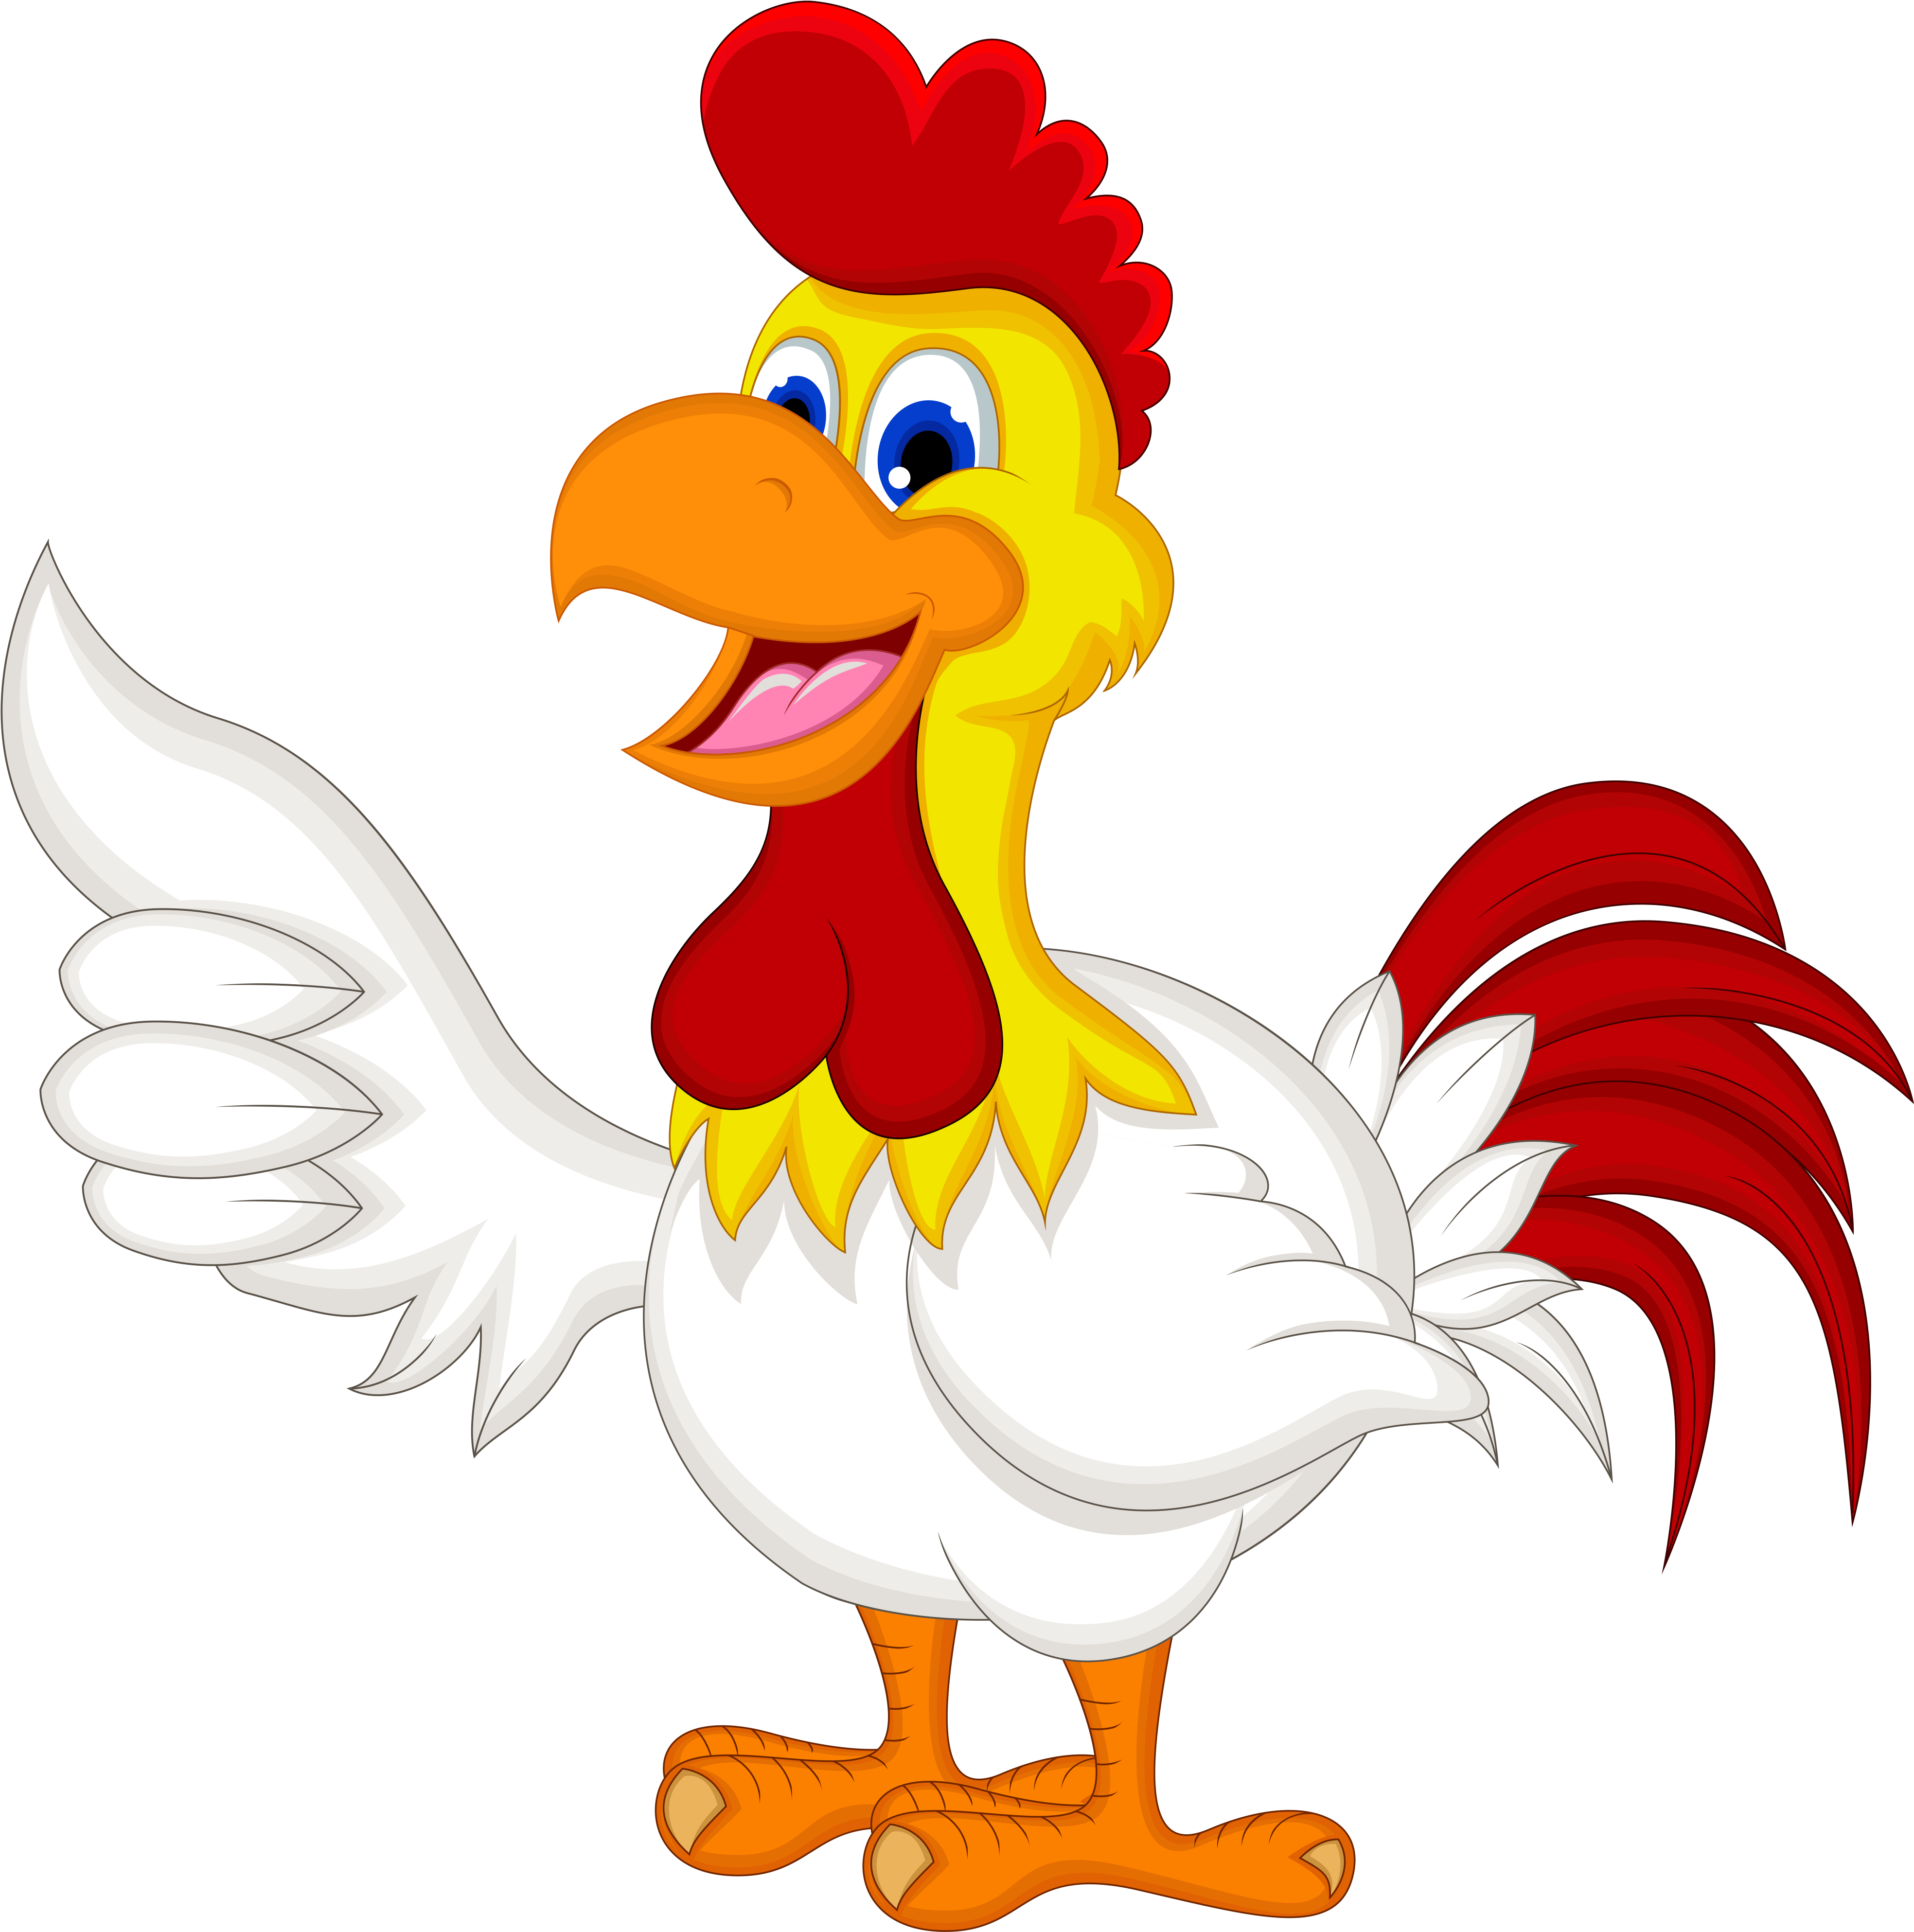 0 118392 9ae09a13 Orig - Cartoon Chicken With Thumbs Up (4114x4000)